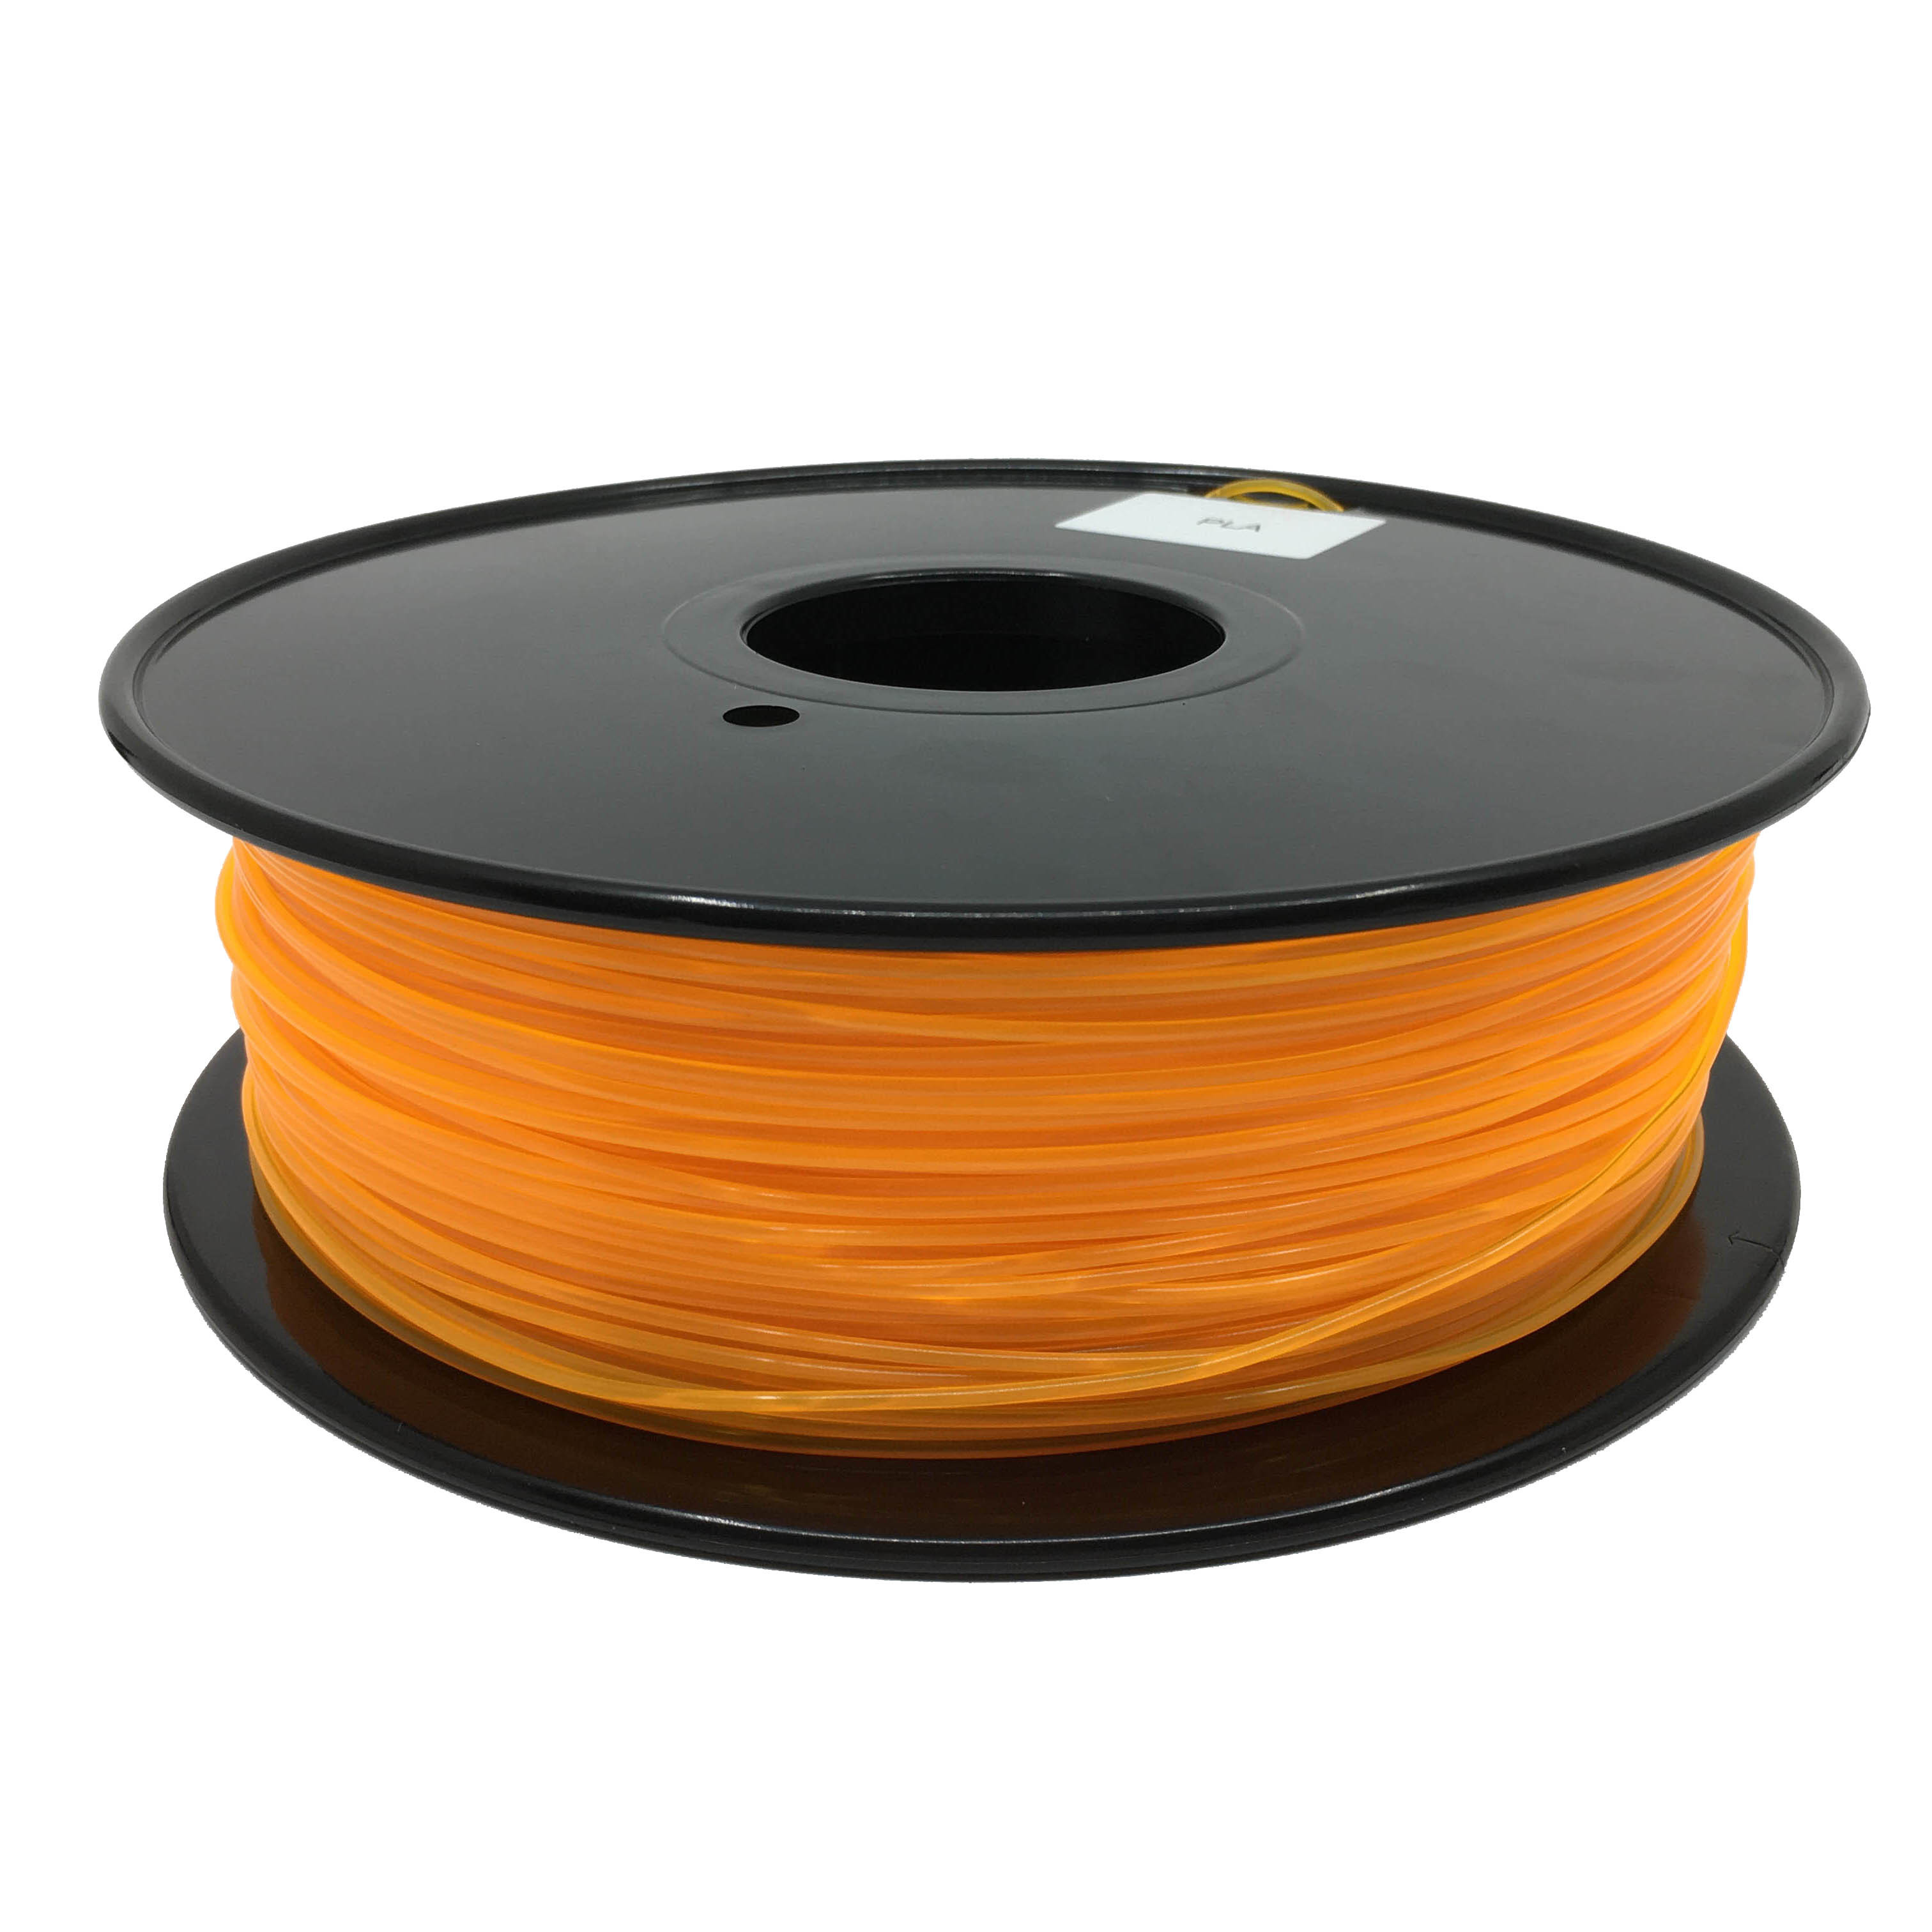 China 1.75 mm Pla 3d Printer Material Dimensional Accuracy + / - 0.03mm With Spool 1KG on sale